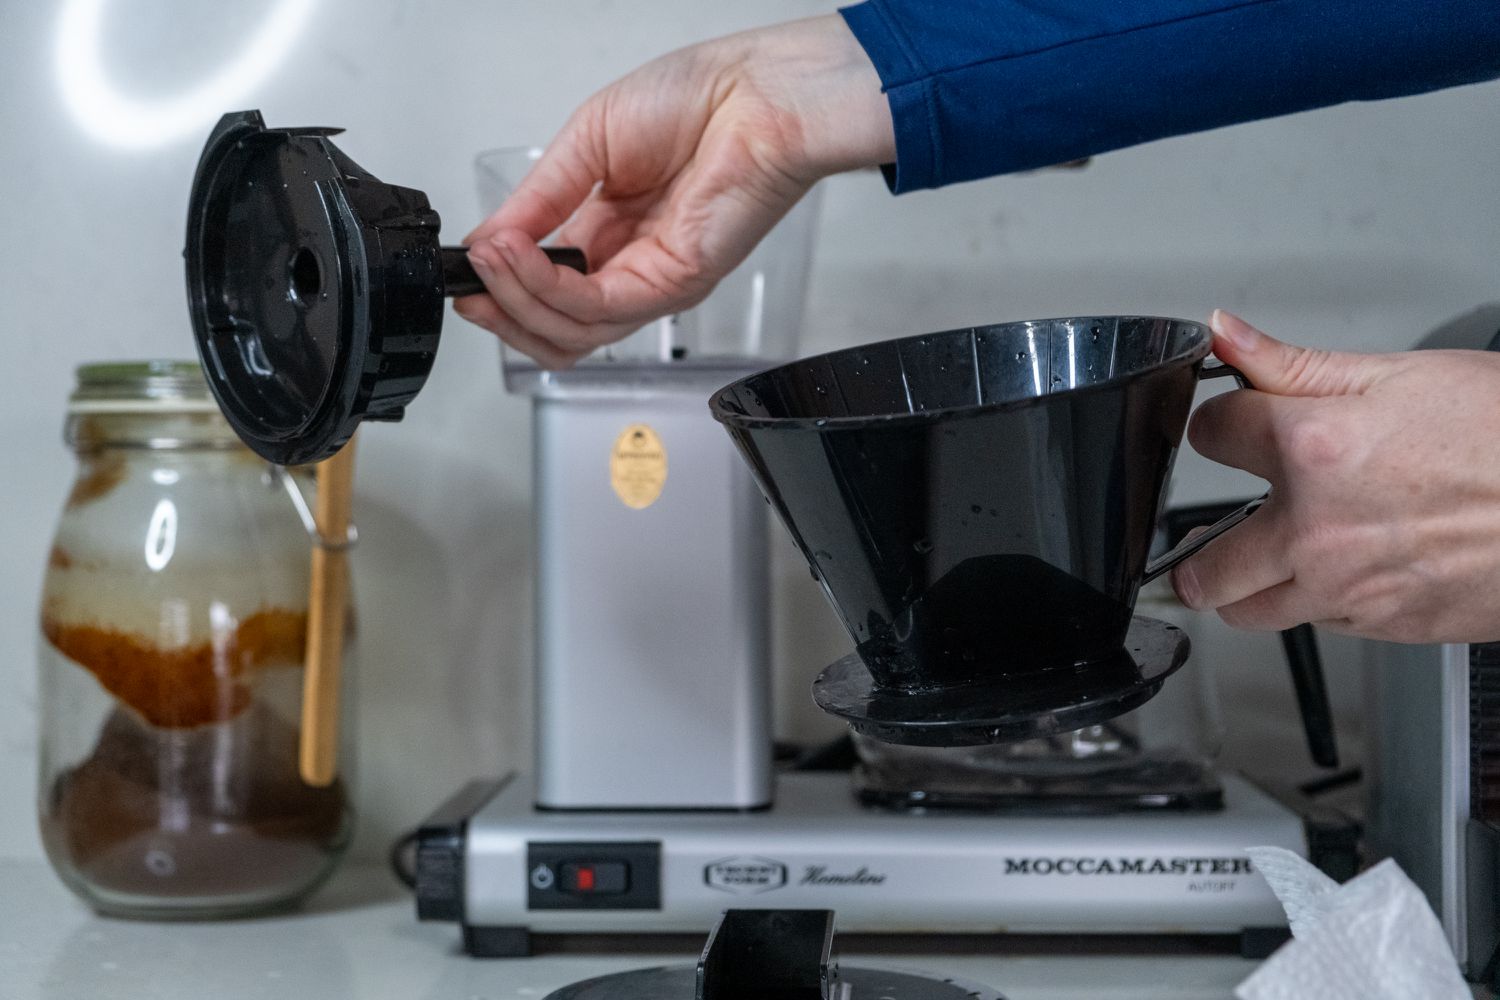 A Step-By-Step Guide: How to Descale Your Coffee Machine